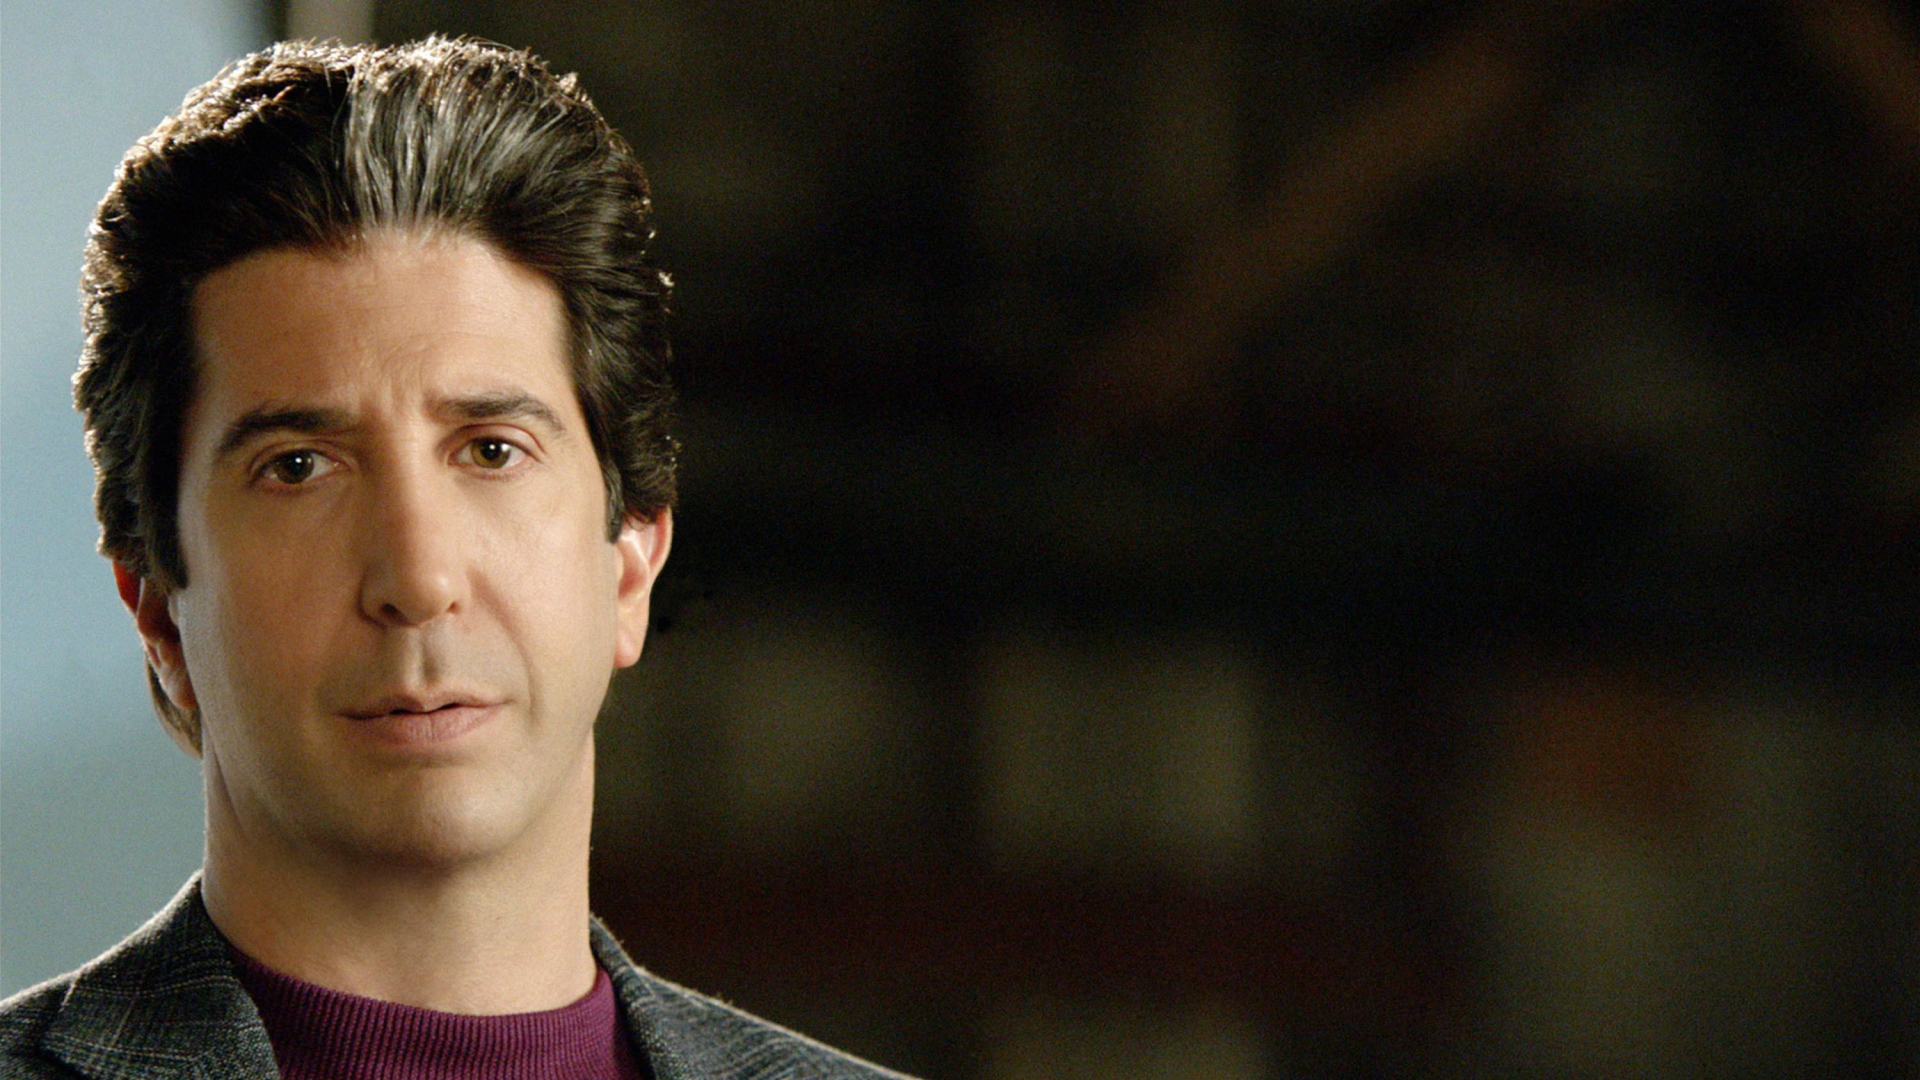 tv show, american crime story, david schwimmer Aesthetic wallpaper